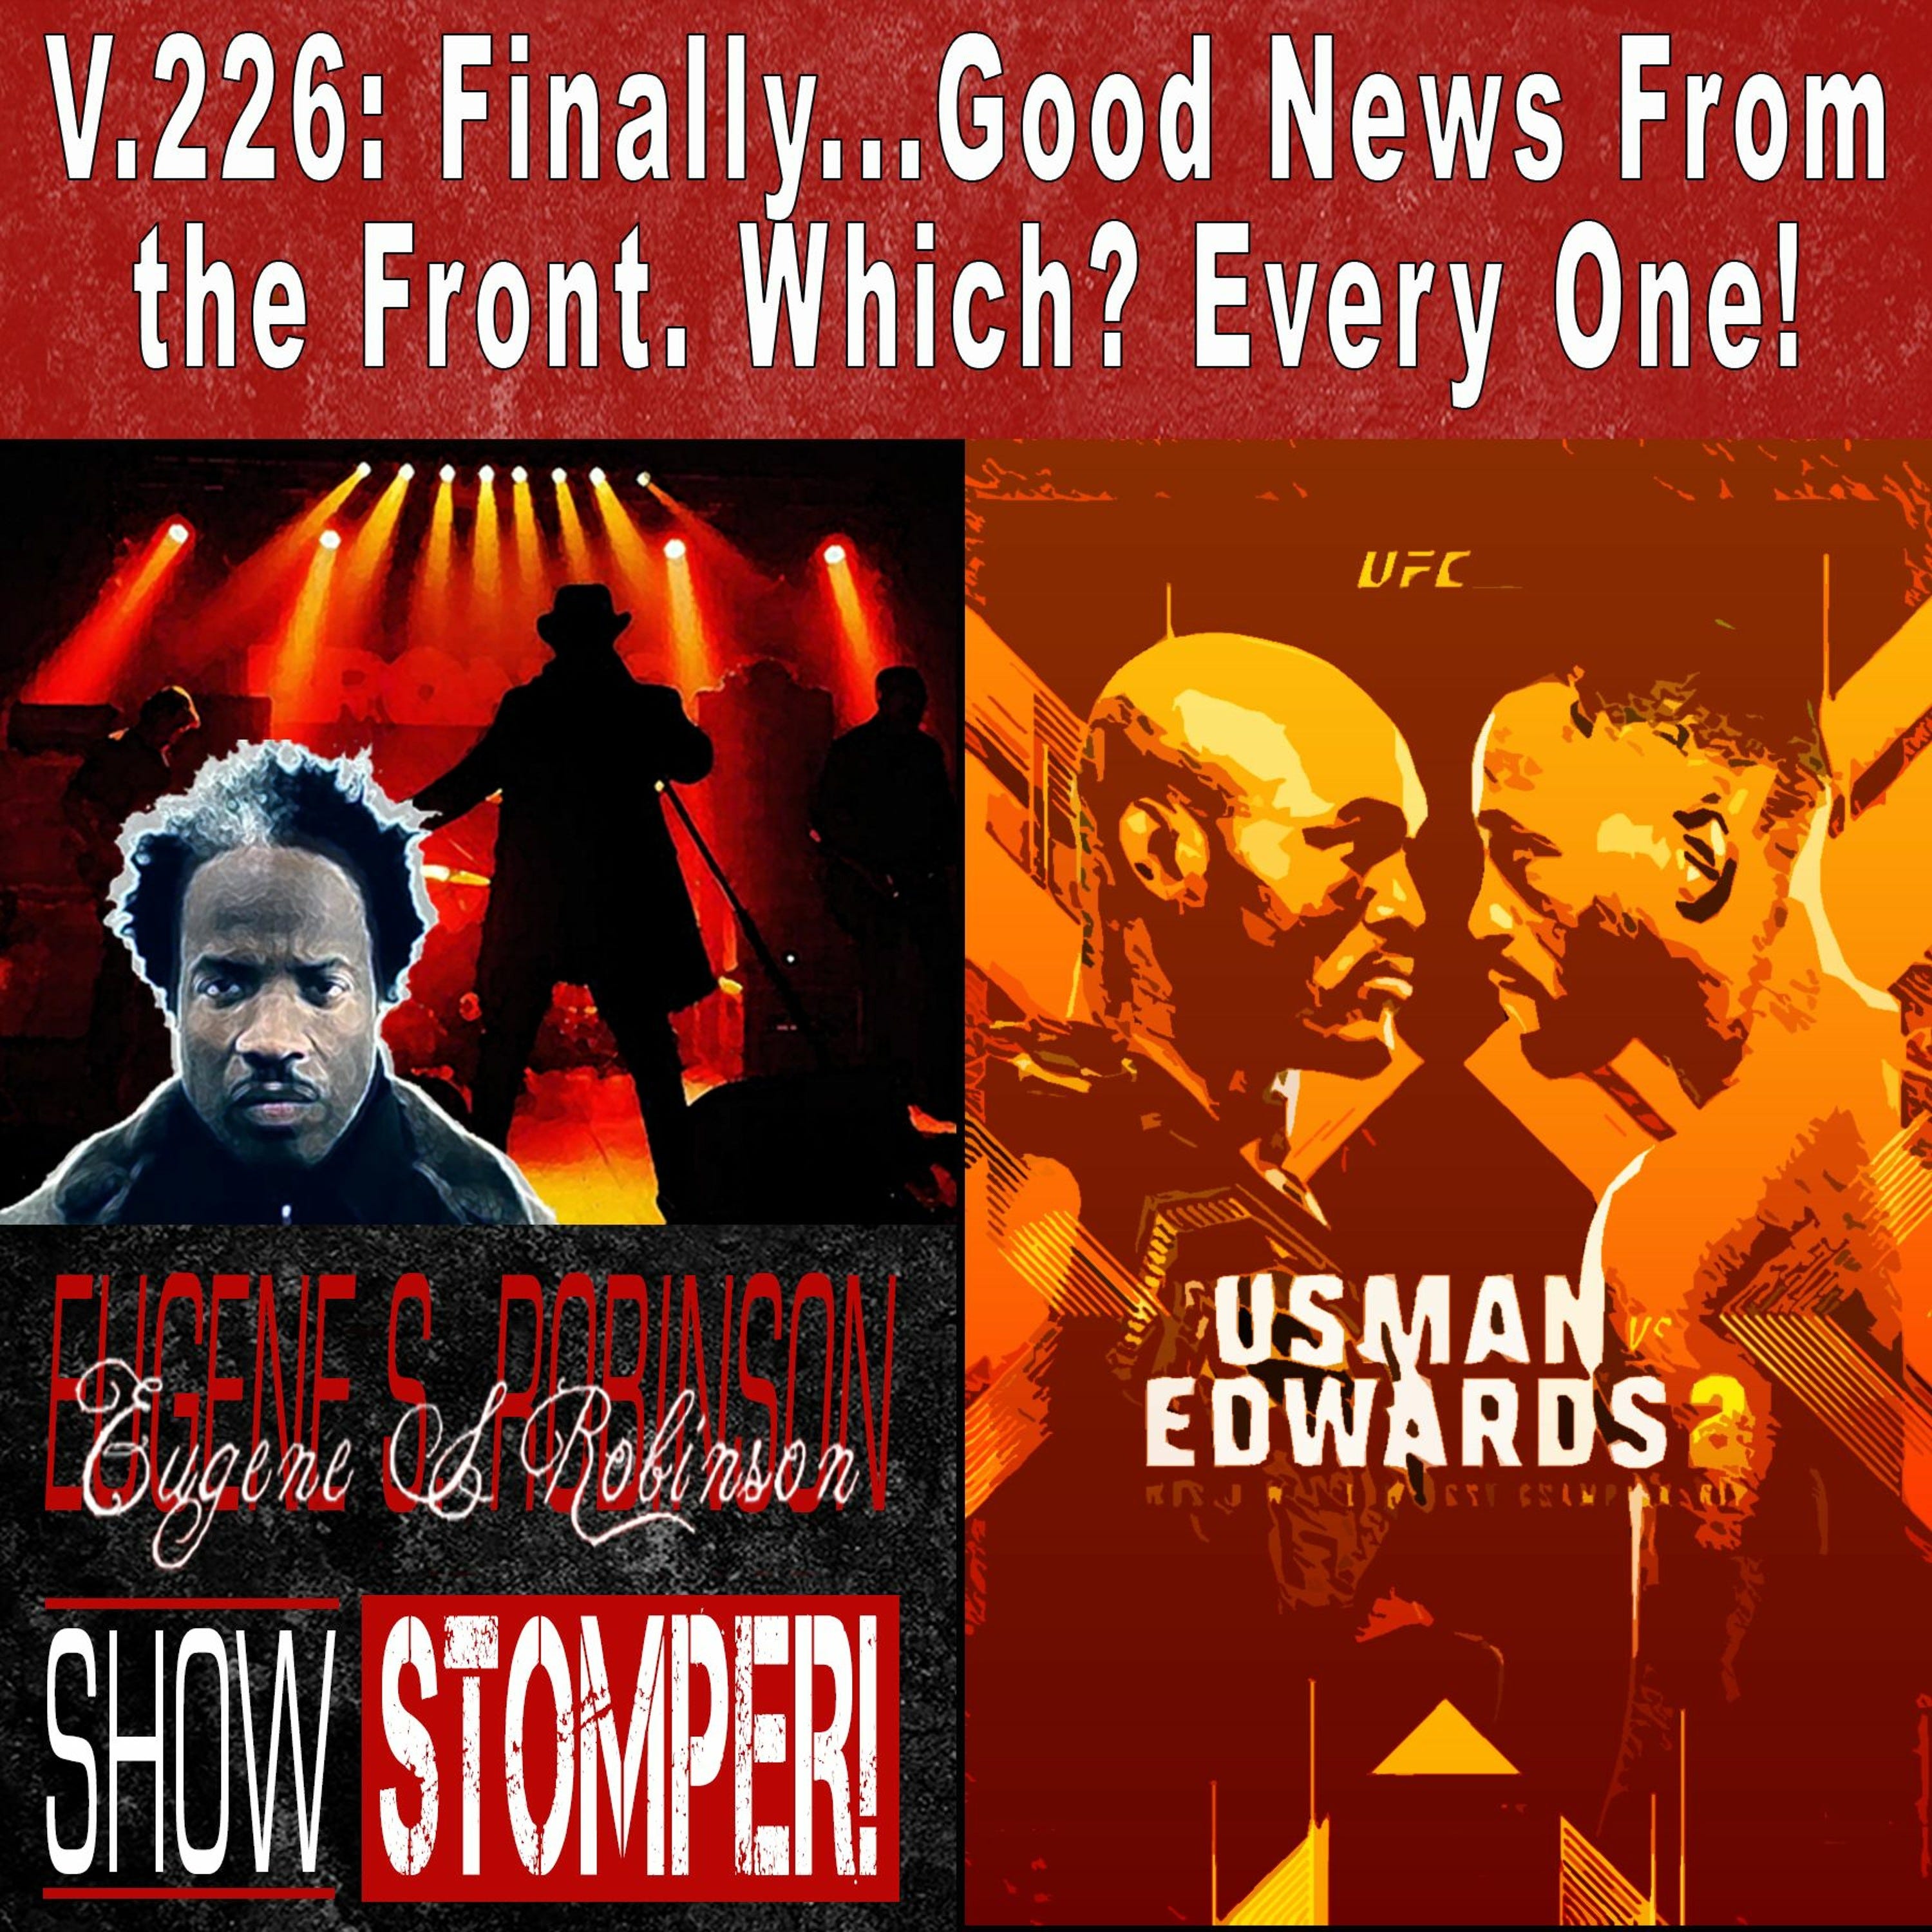 V.226: Finally...Good News From the Front. Which? Every One! On the Eugene S. Robinson Show Stomper!